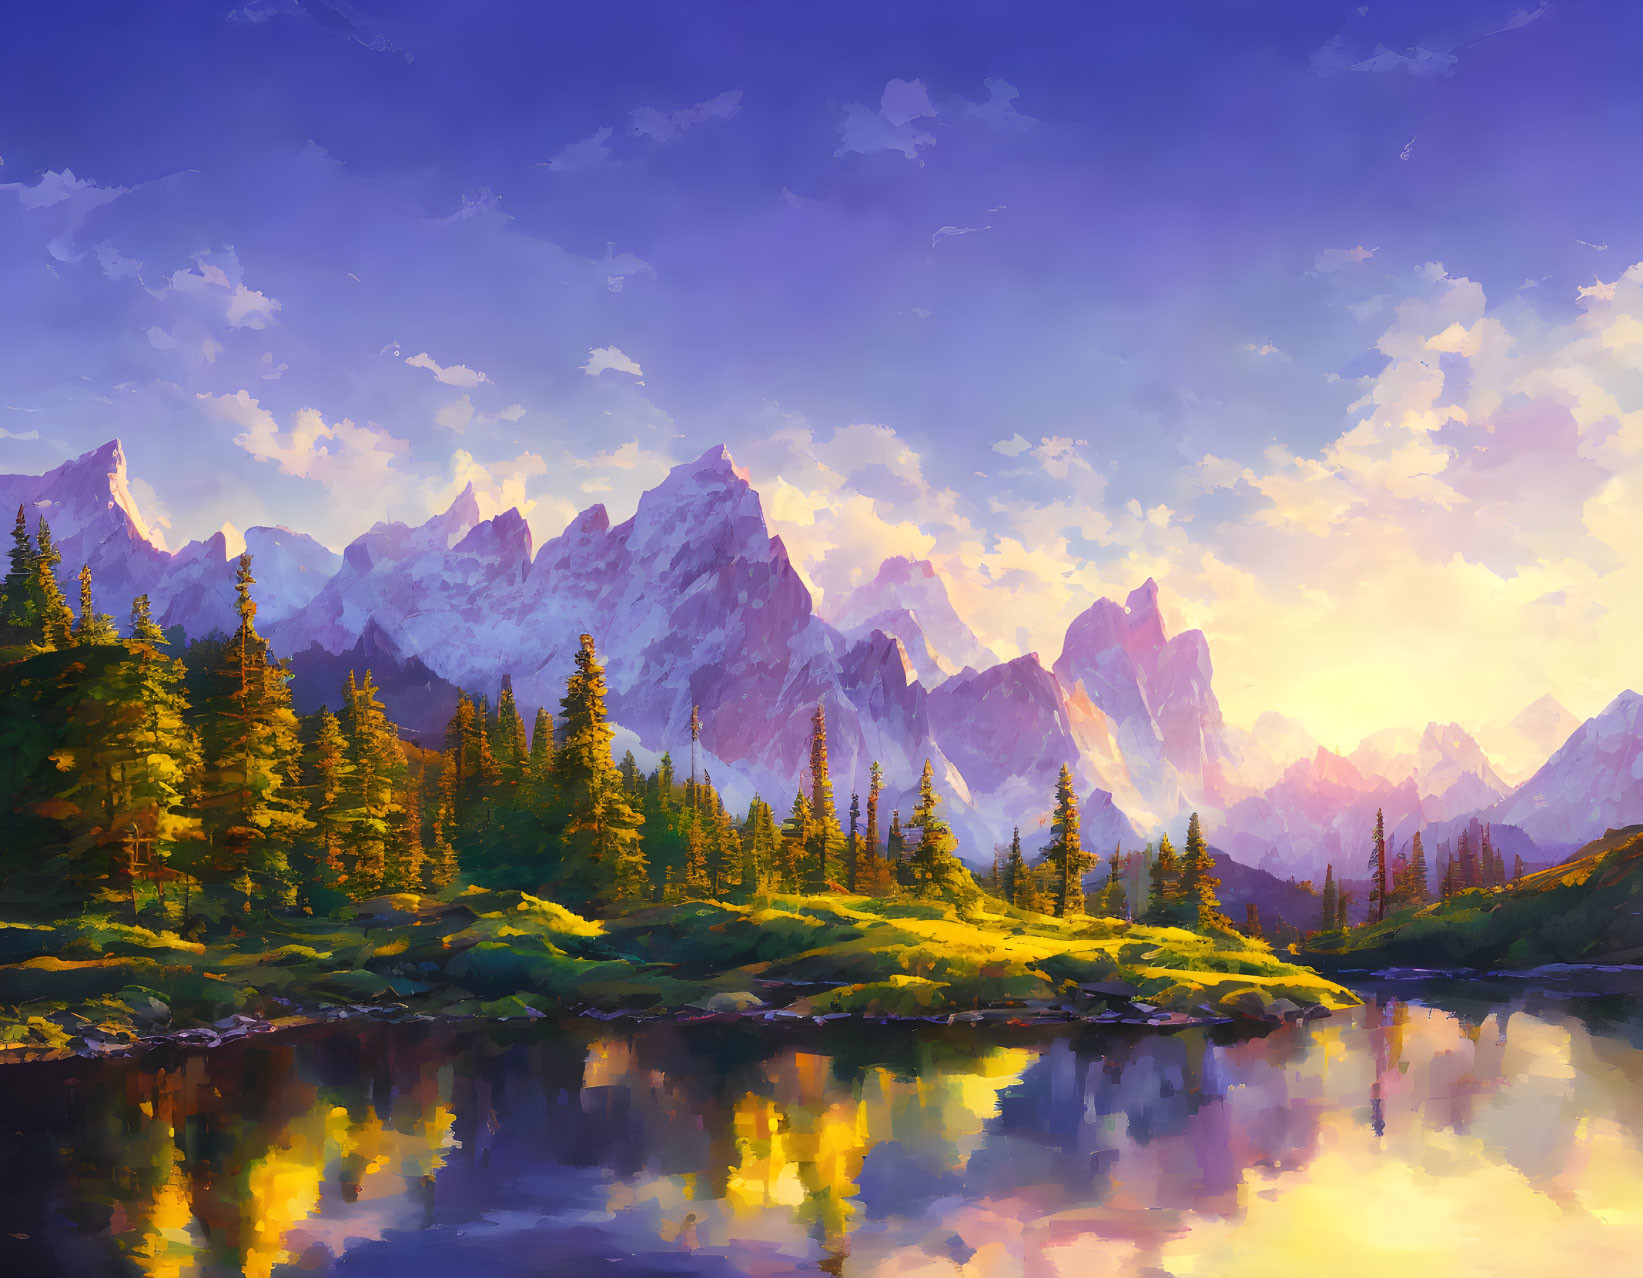 Scenic mountain landscape with lake, pine trees, and colorful sky.